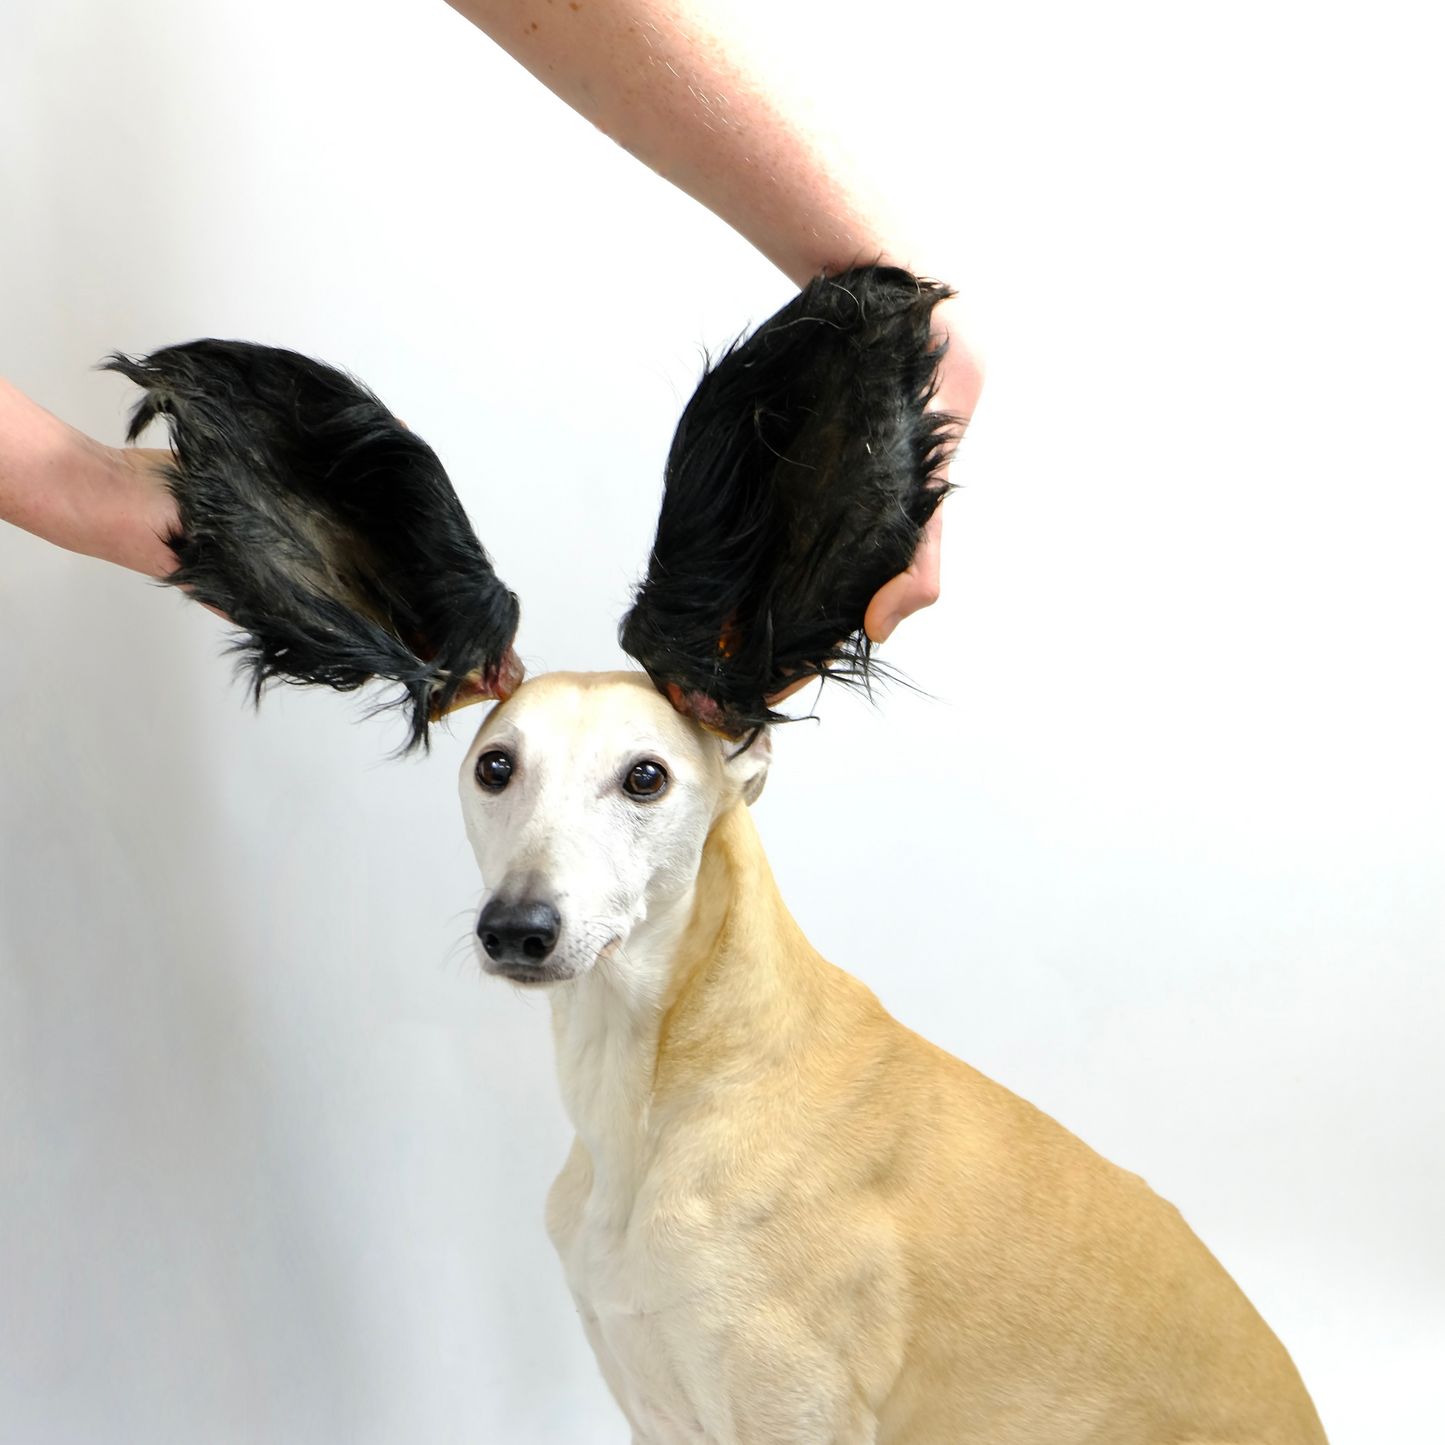 Large Hairy Cow Ears (10pcs)